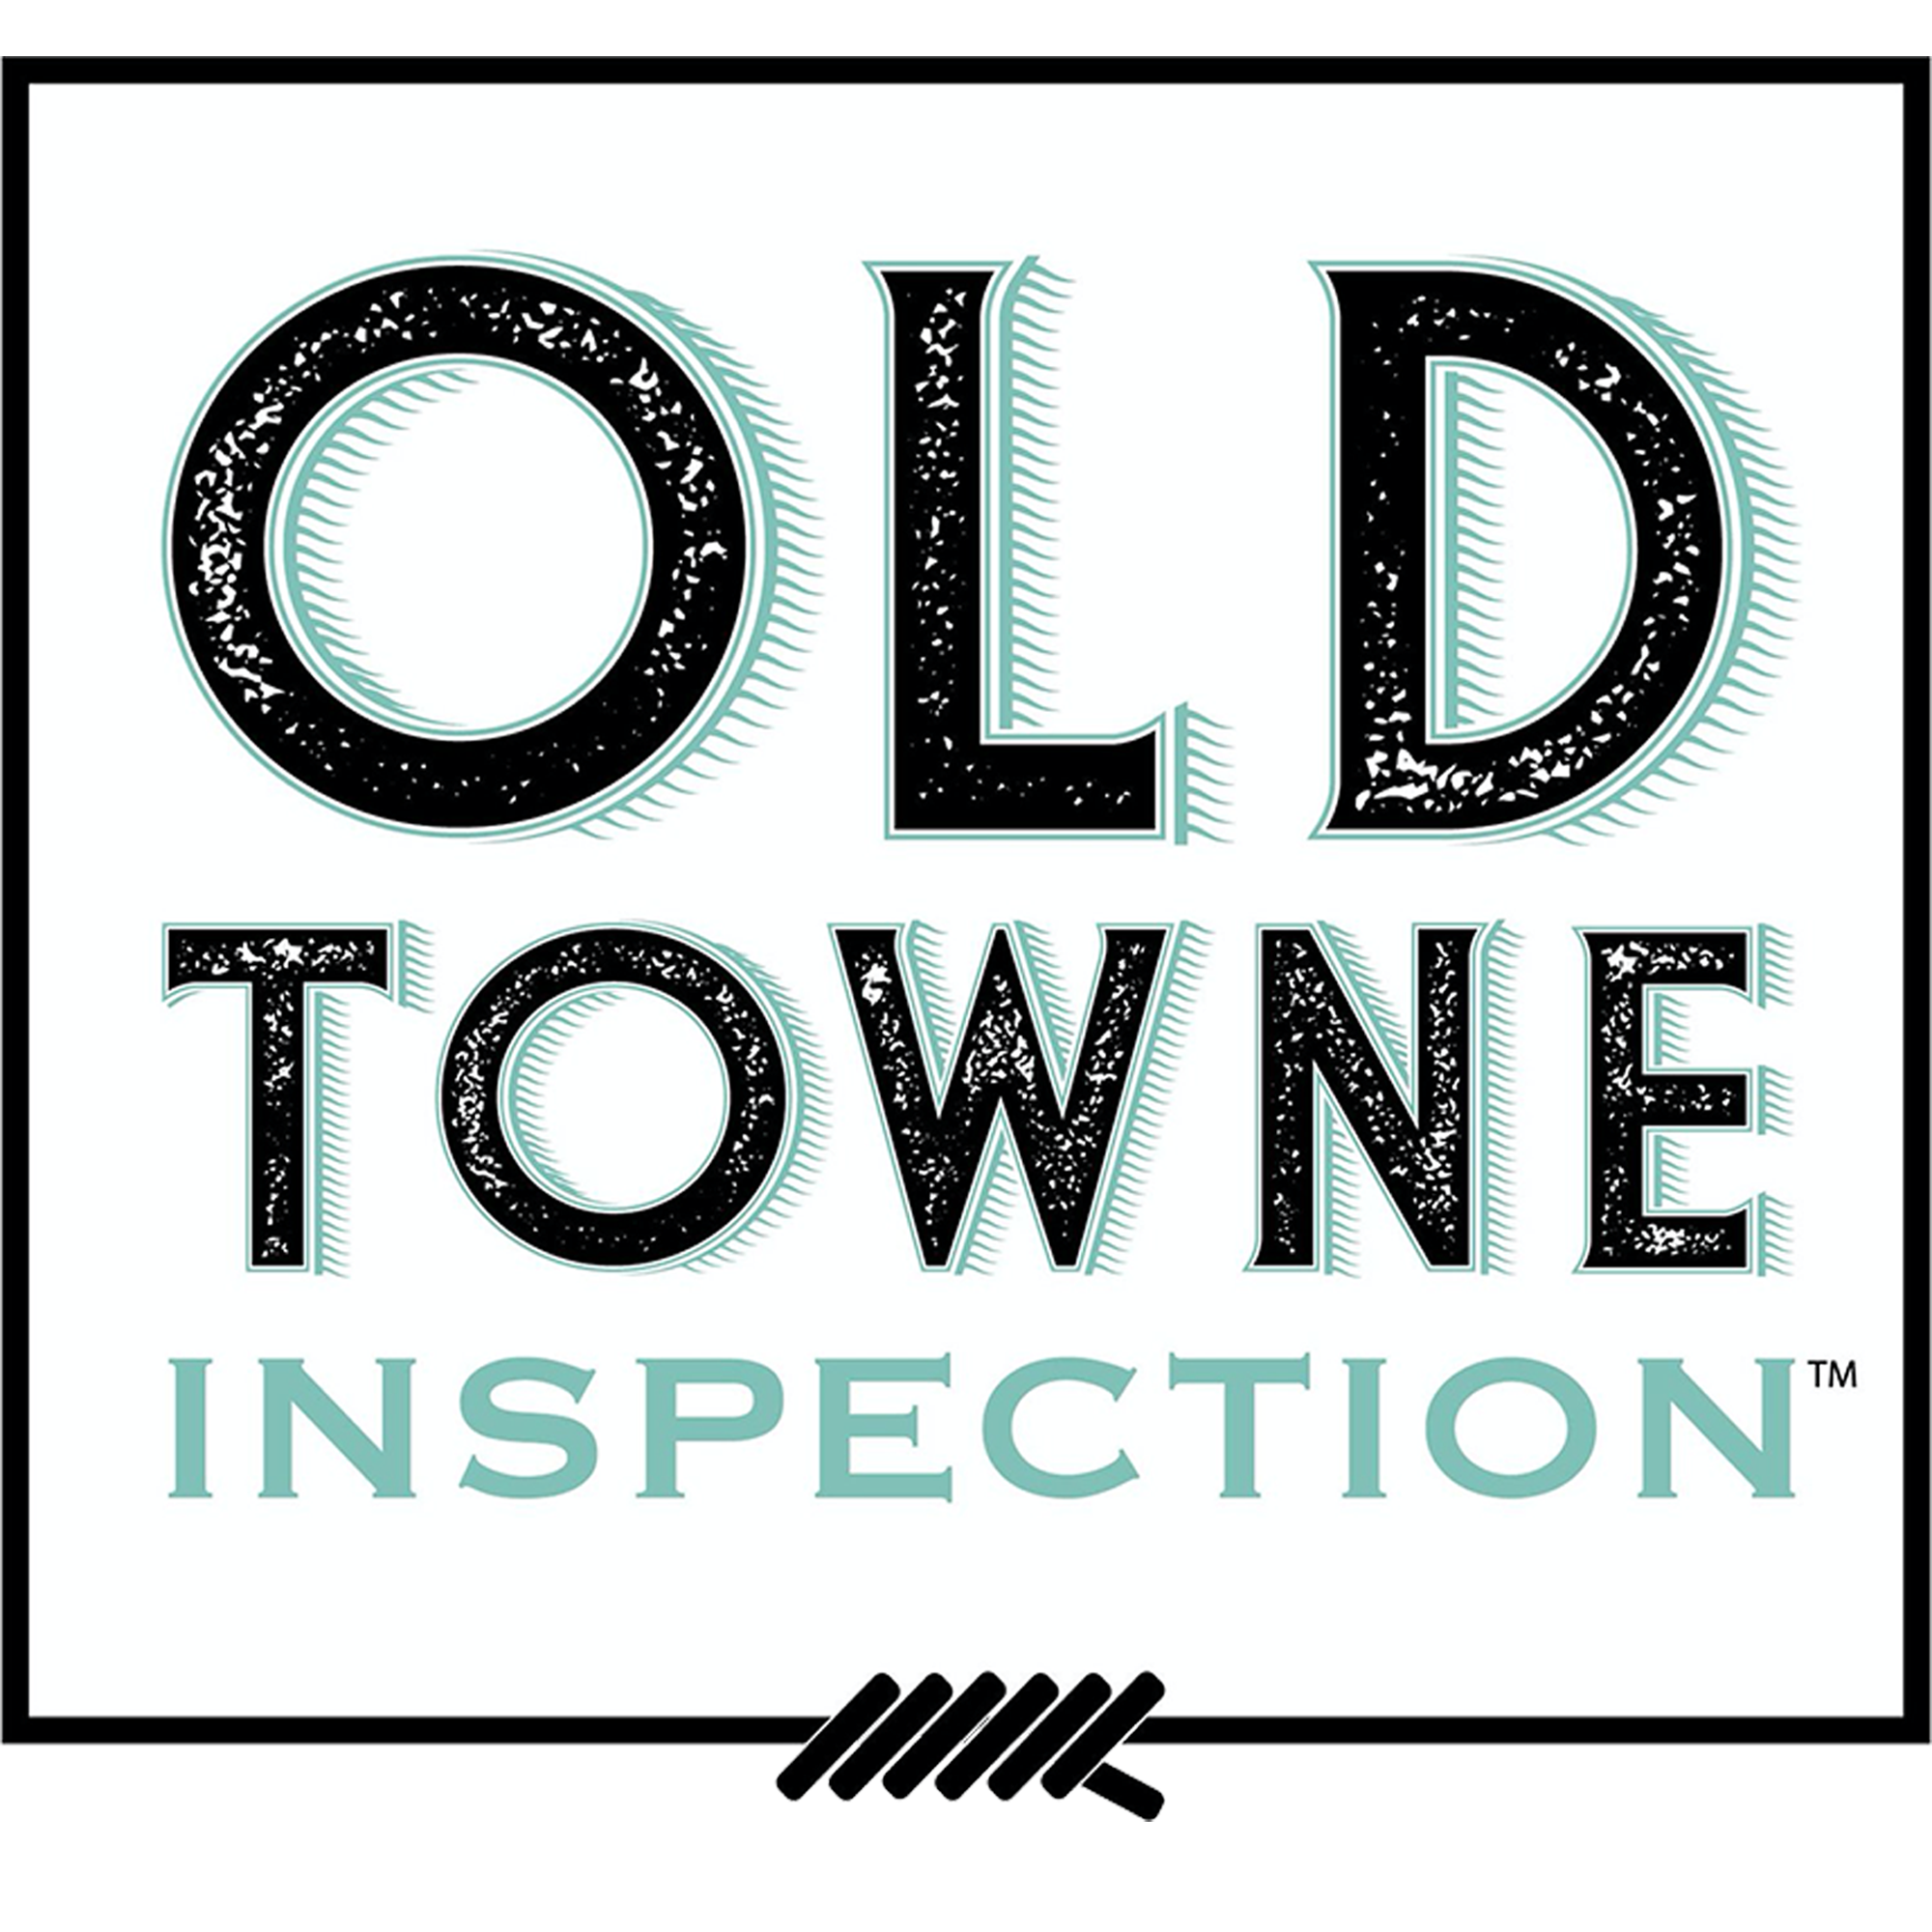 Old Towne Inspection